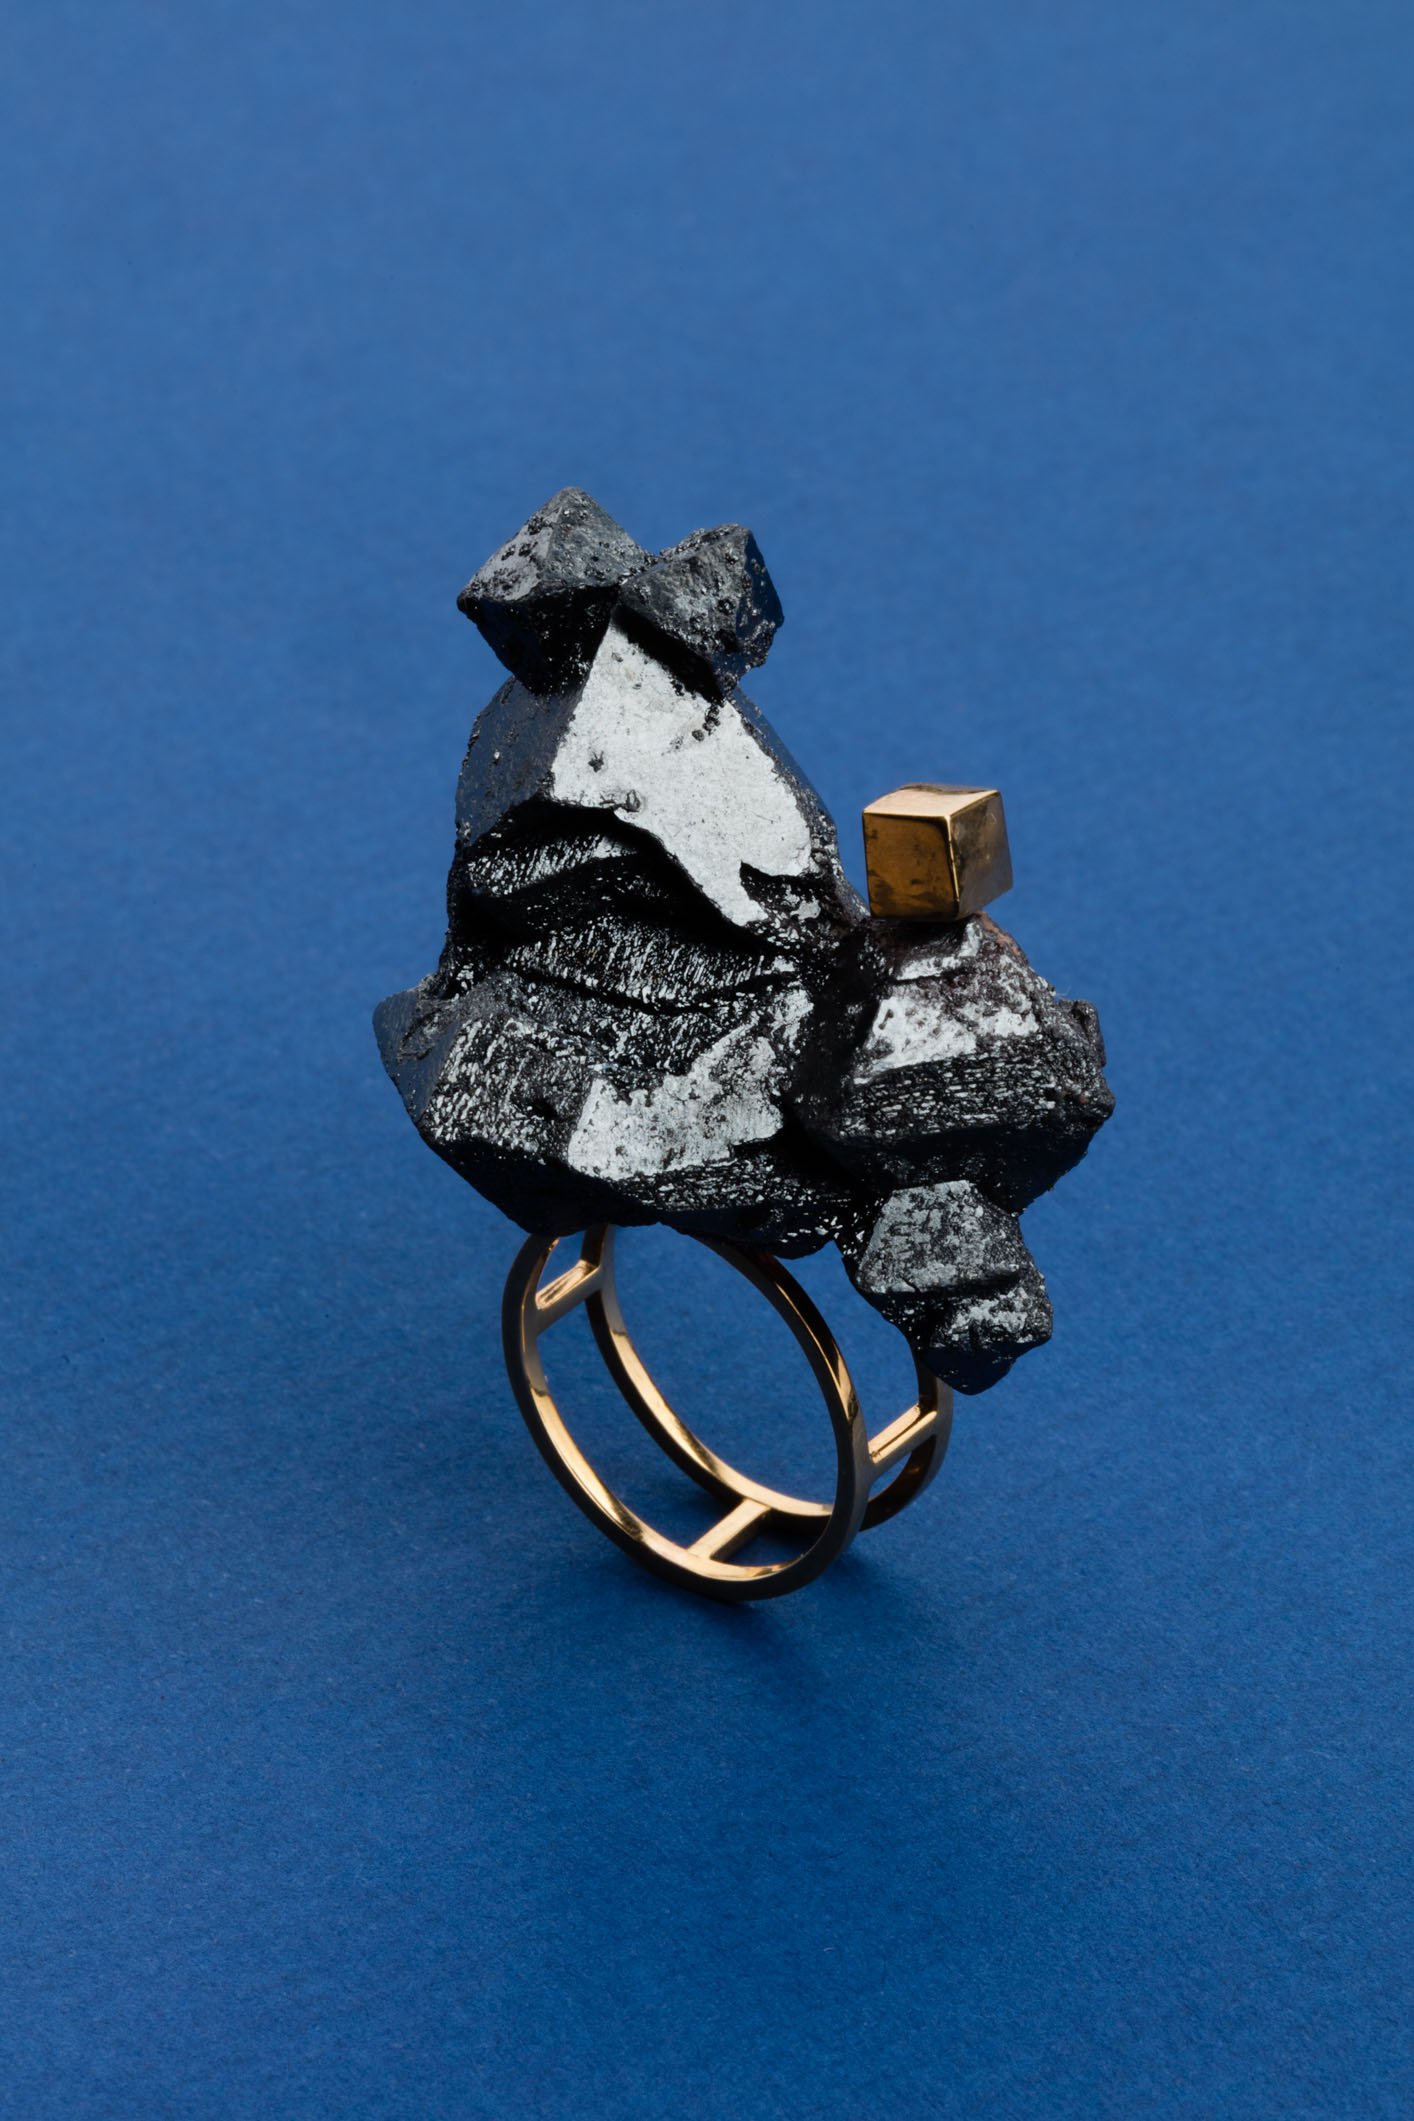 Christodoulos Panayiotou, Untitled, ring. Hematite after magnetite, 18ct yellow gold, handmade, dimensions variable, 2016